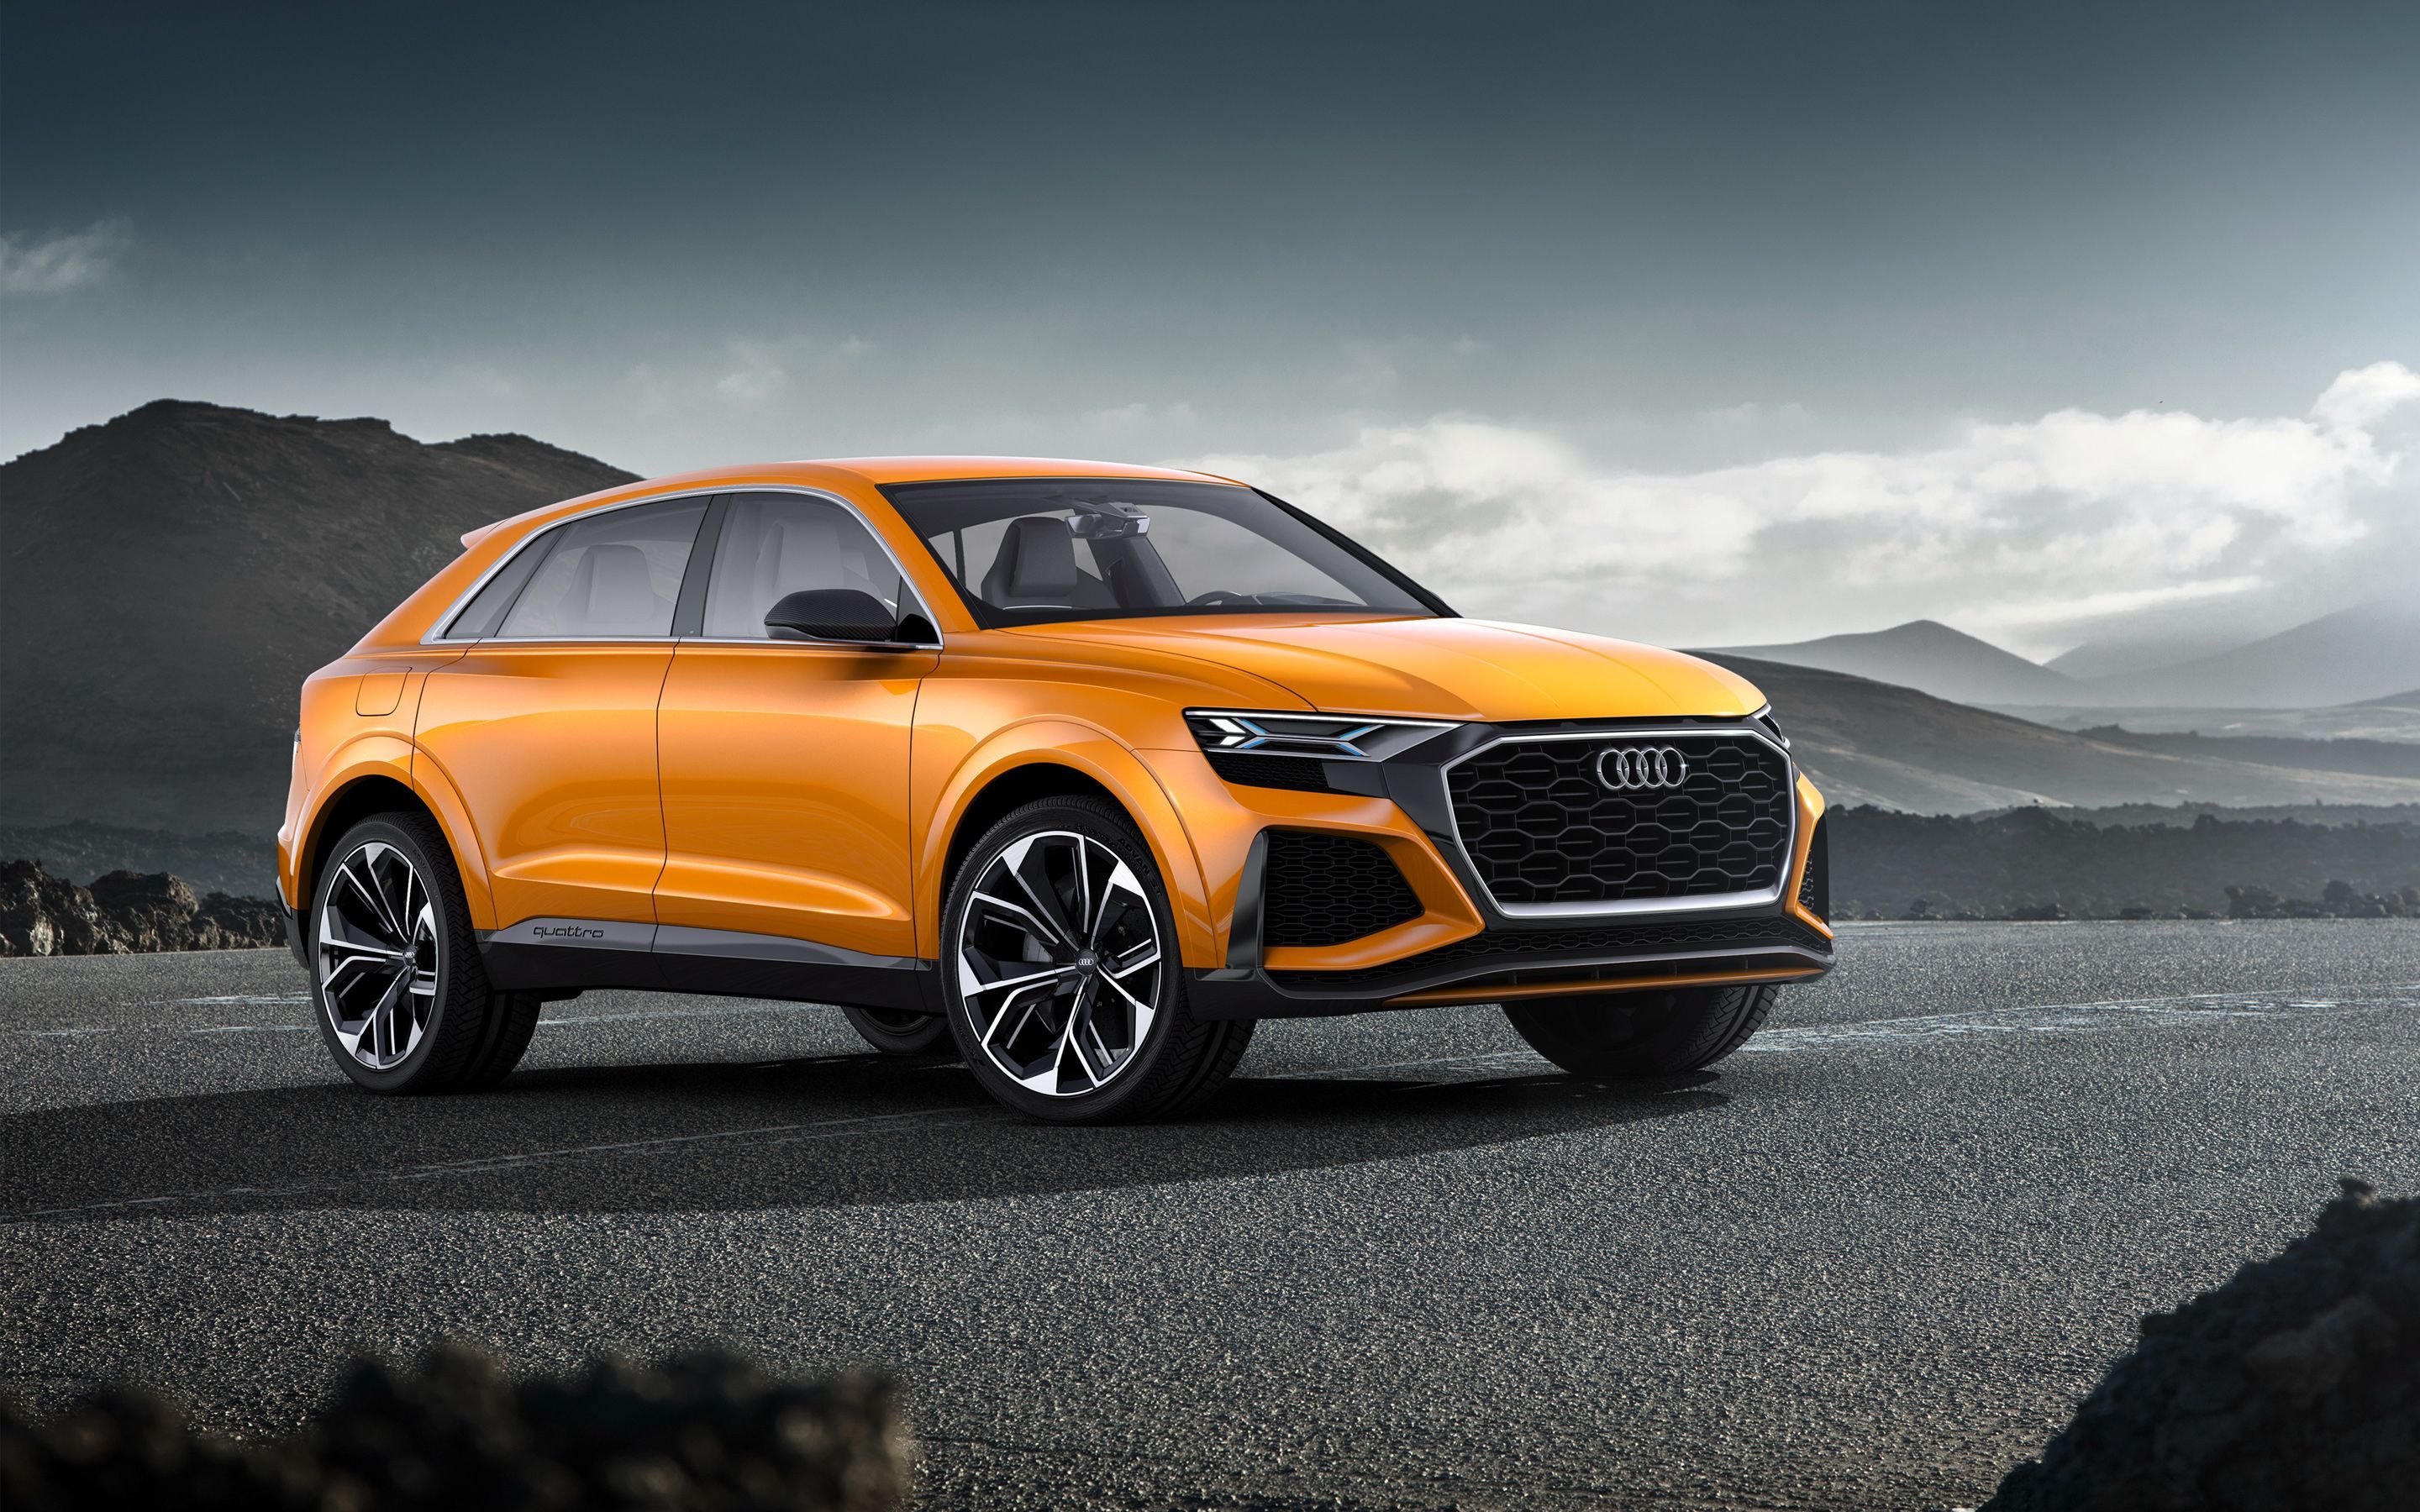 How To Rent A Audi Q8 In Dubai 